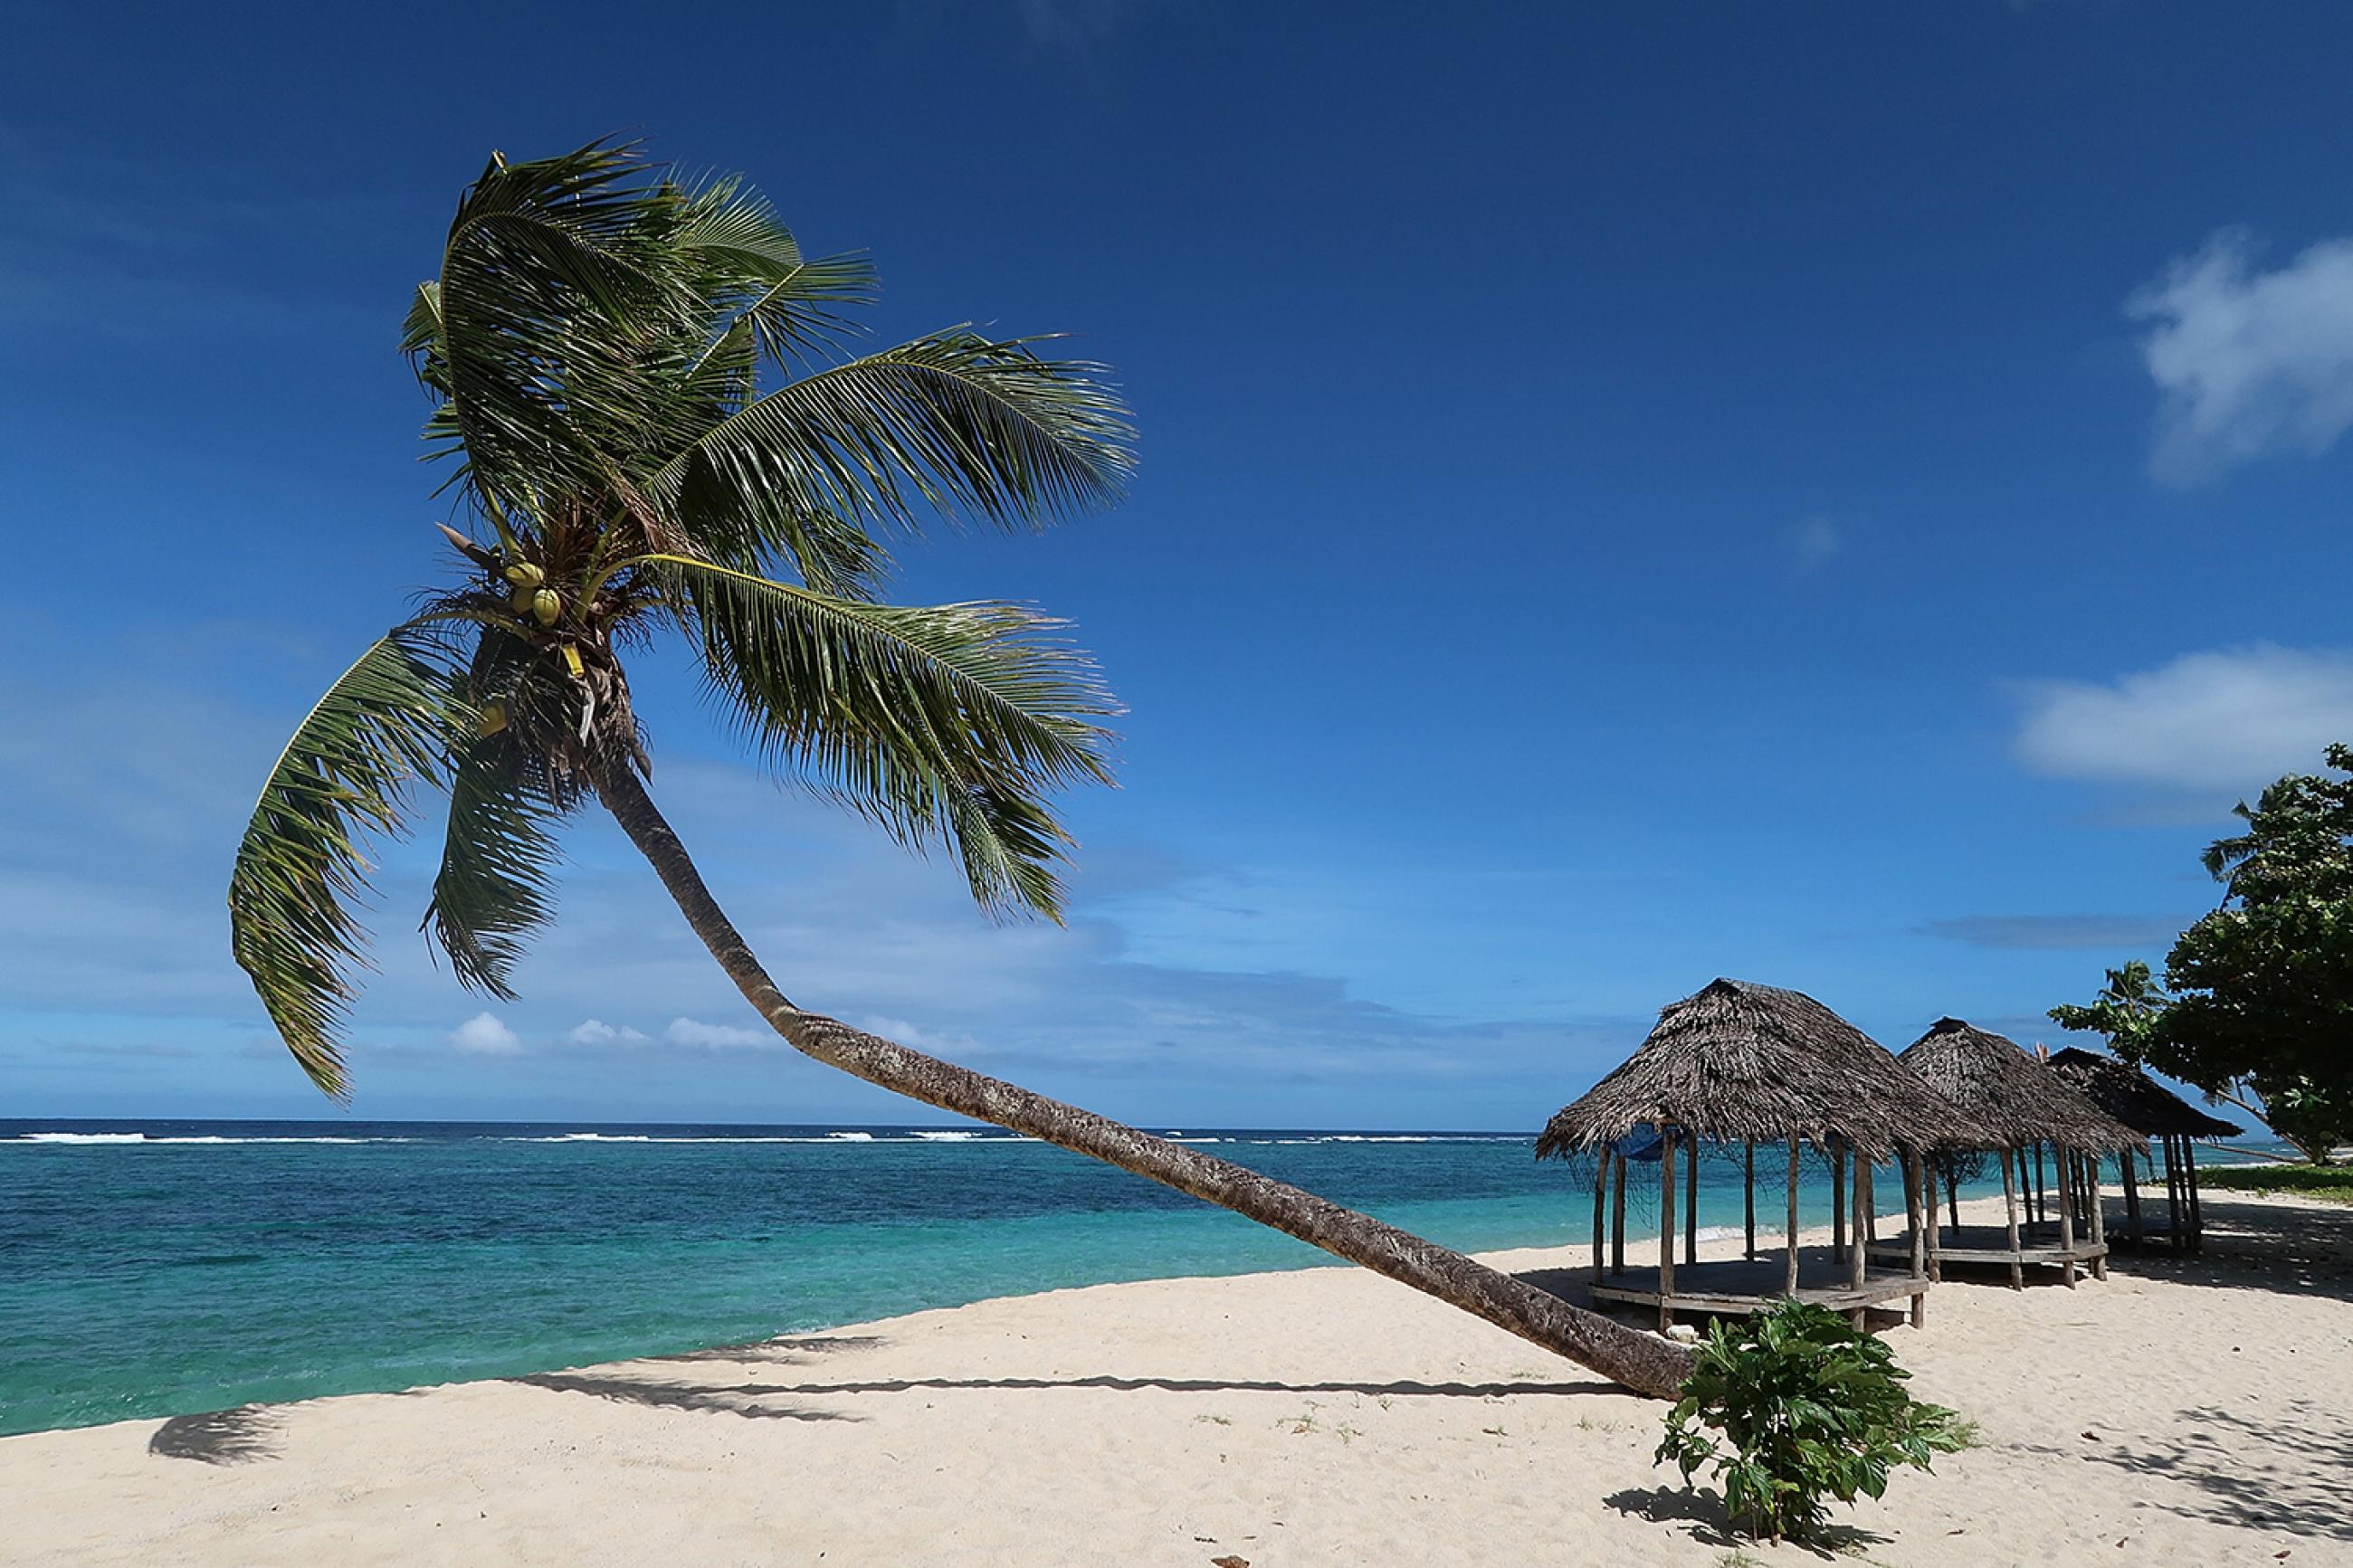 A Samoan beach before the coronavirus crisis—pictured on June 2, 2017 in Saleapaga, Samoa after New Zealand Prime Minister announced a $5.15 million aid package to help boost Samoa's tourism industry. The picture shows a tropical beach in Somoa with gorgeous palm trees and grass huts. GETTY Images/Phil Walter